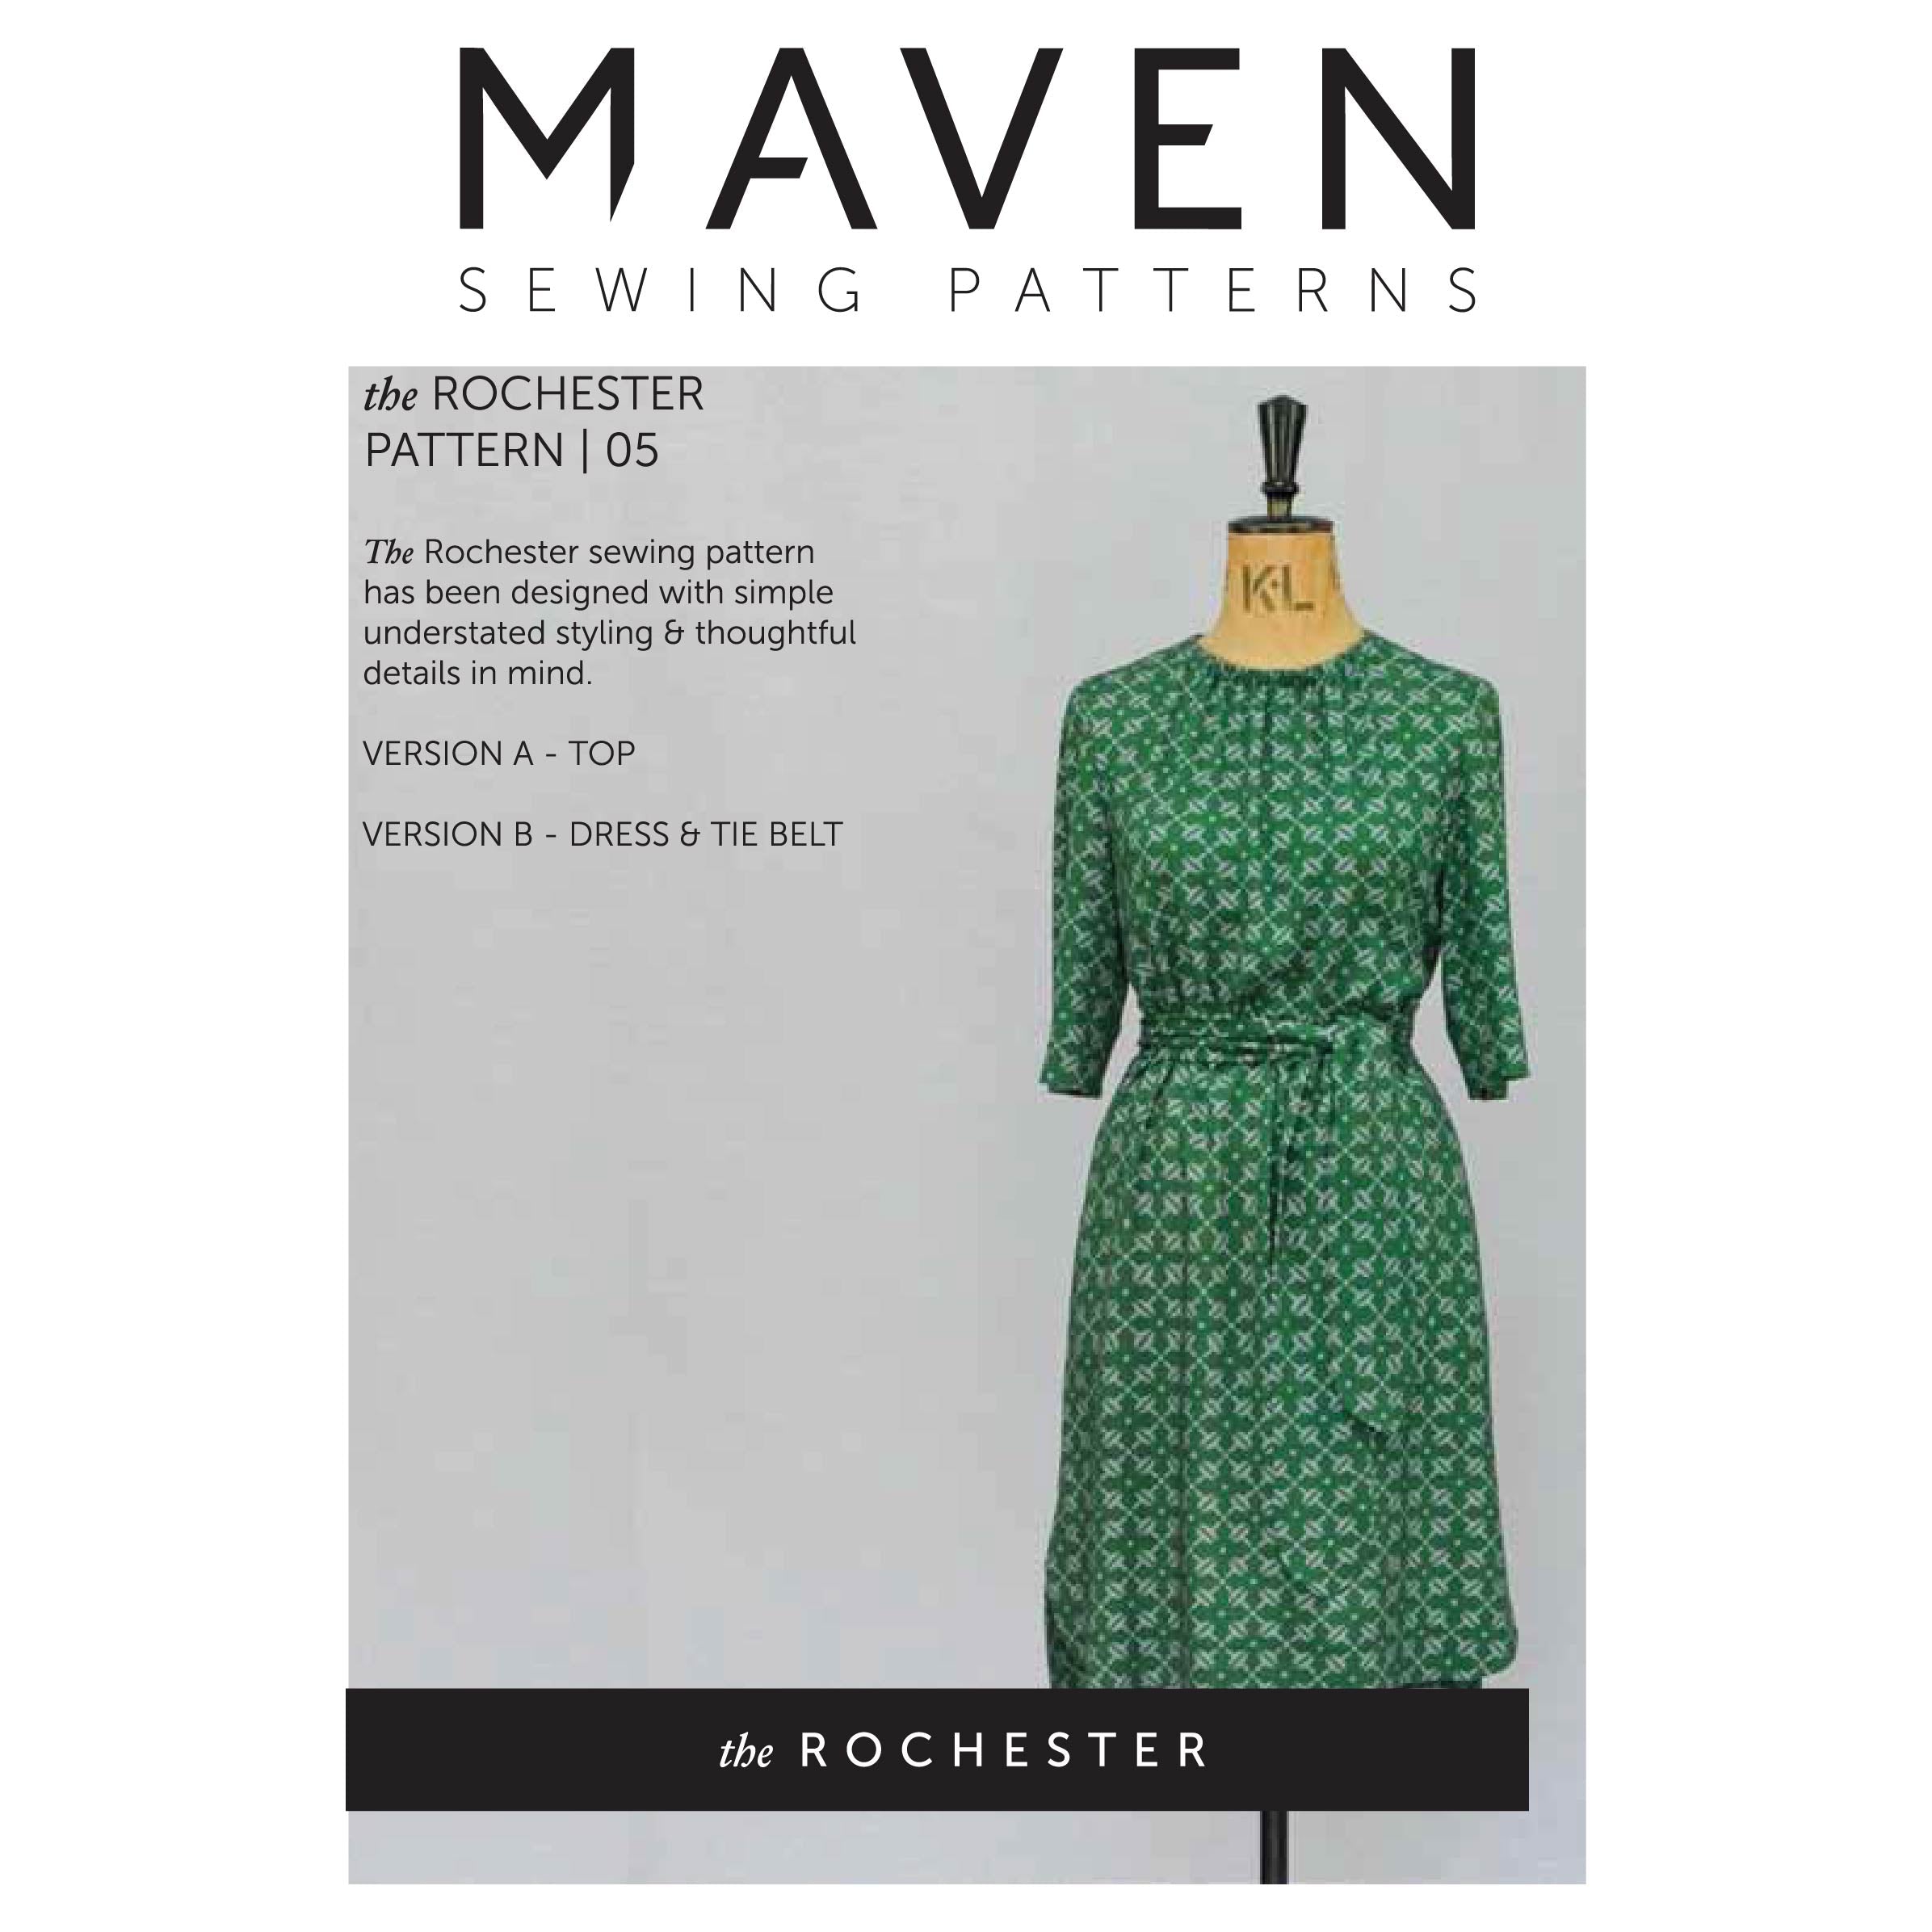 The Rochester - Sewing Pattern | Maven